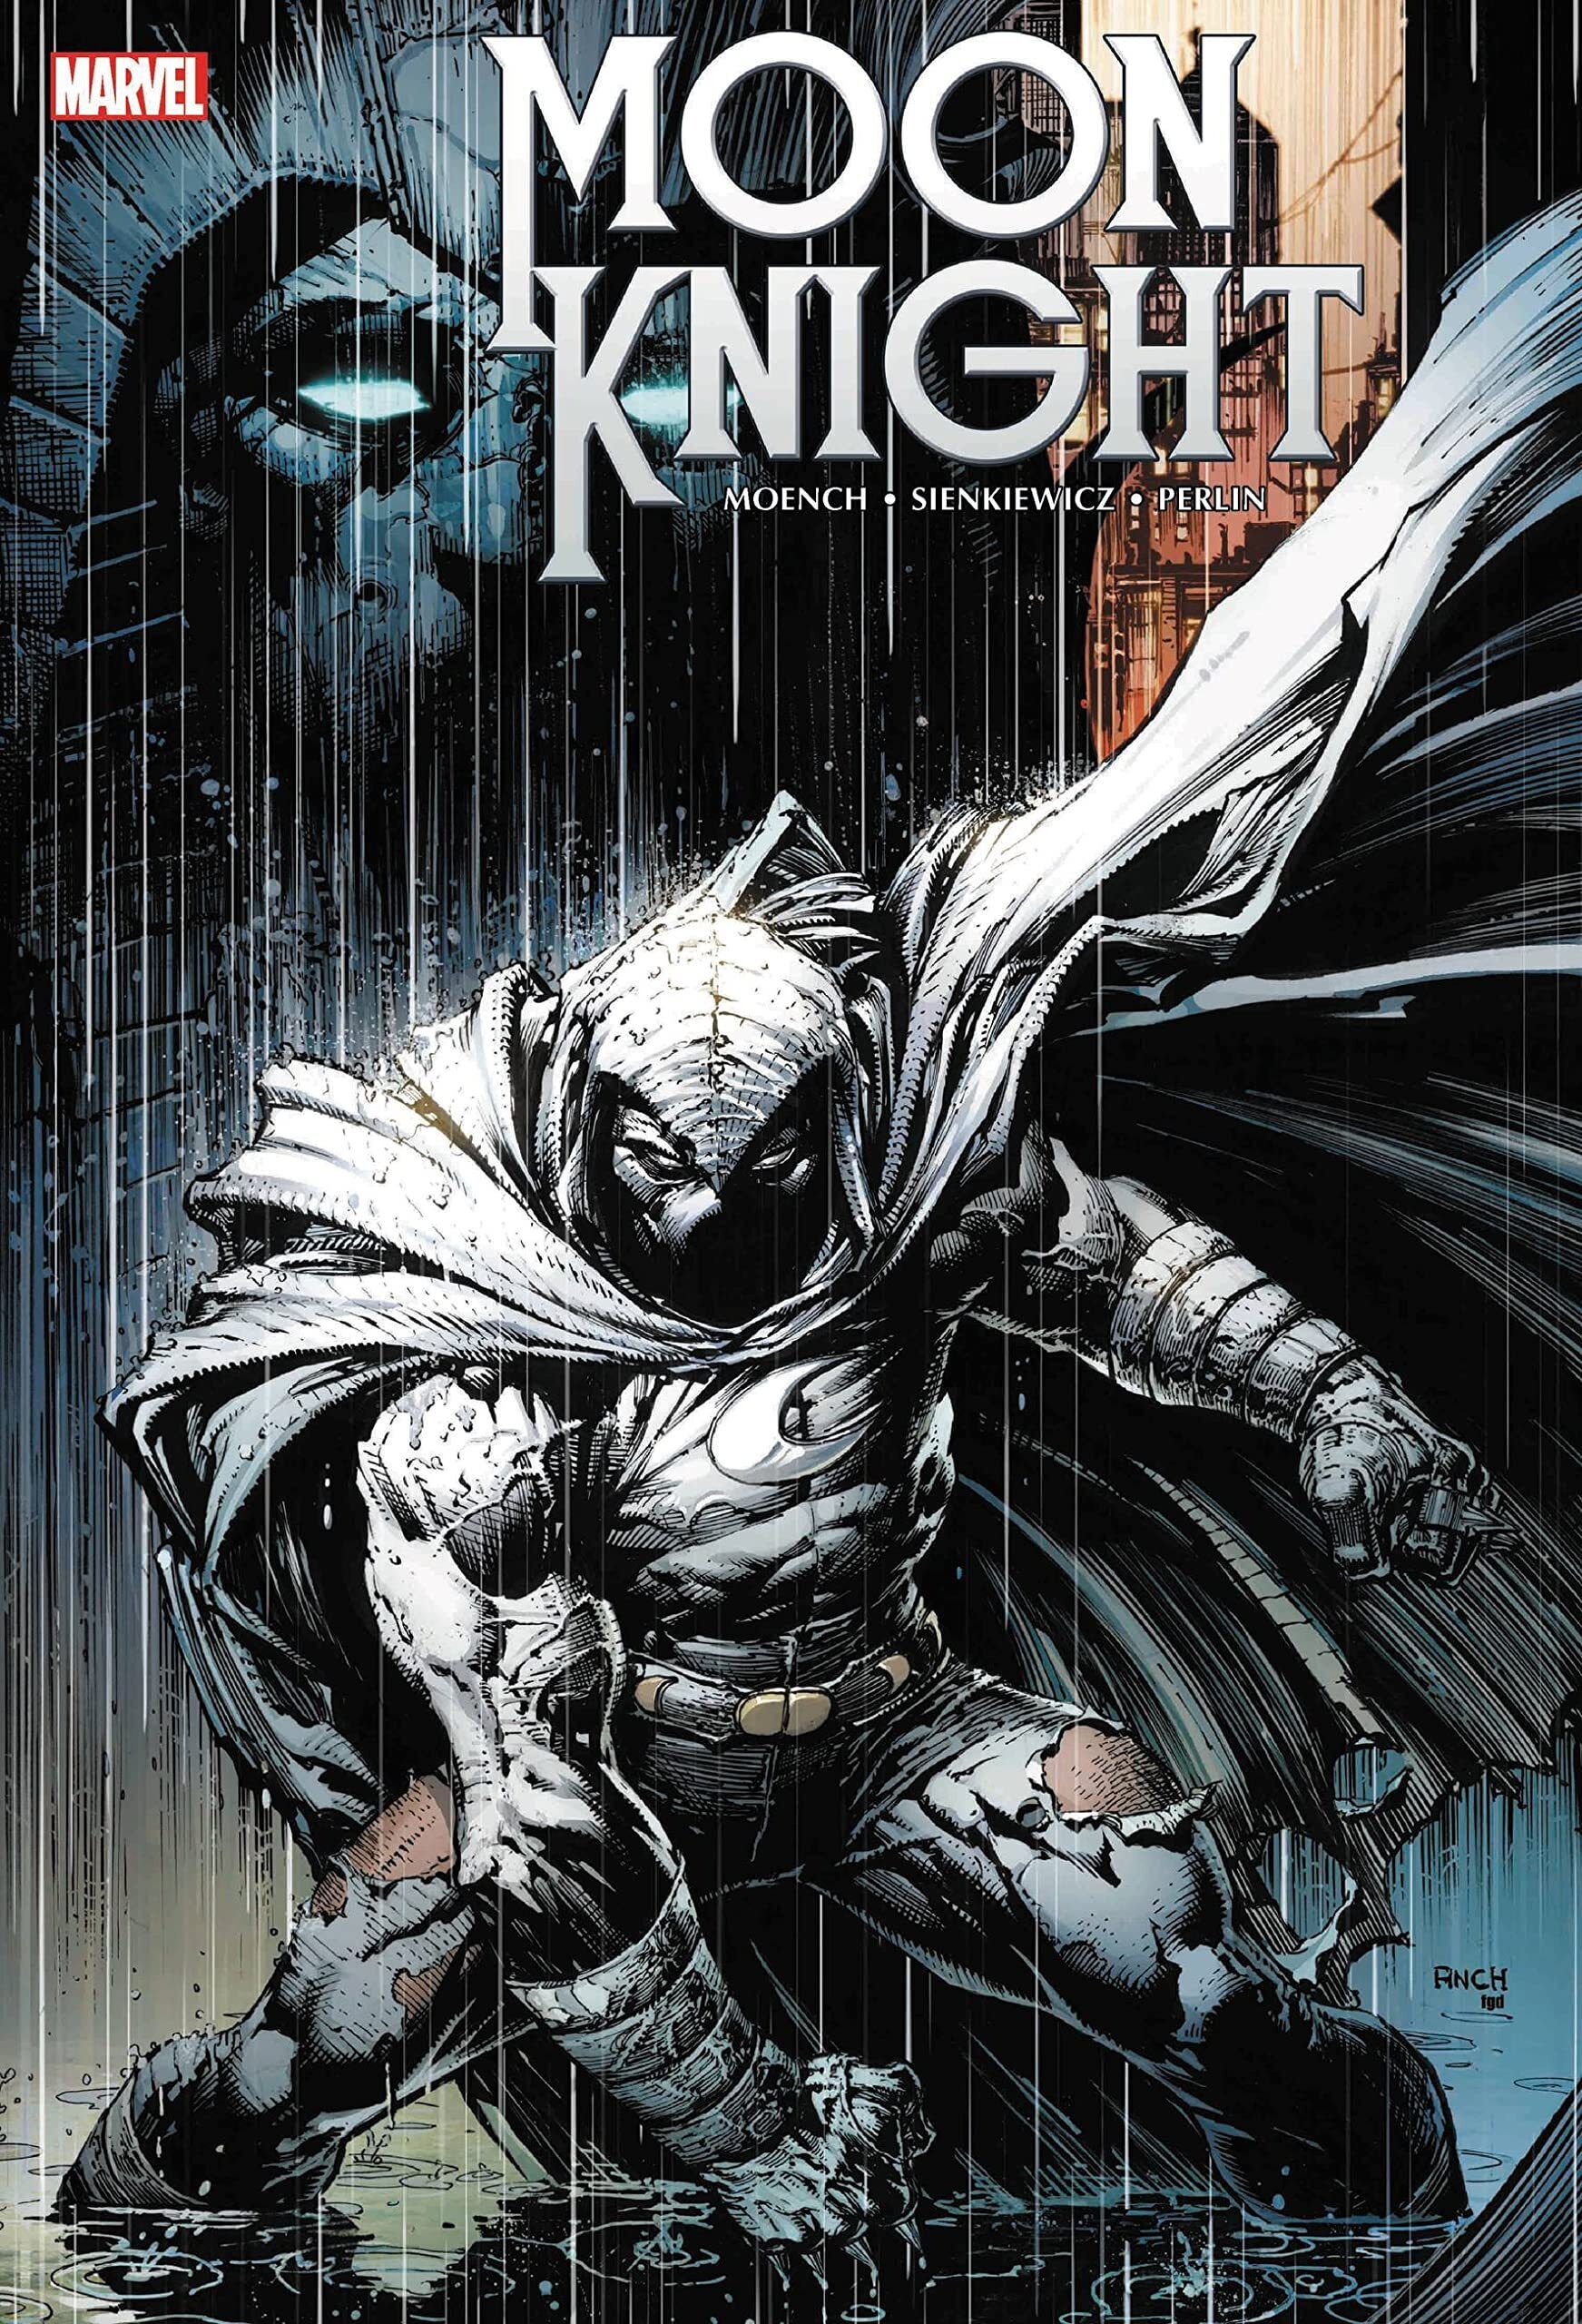 How to Draw Moon Knight - YouTube